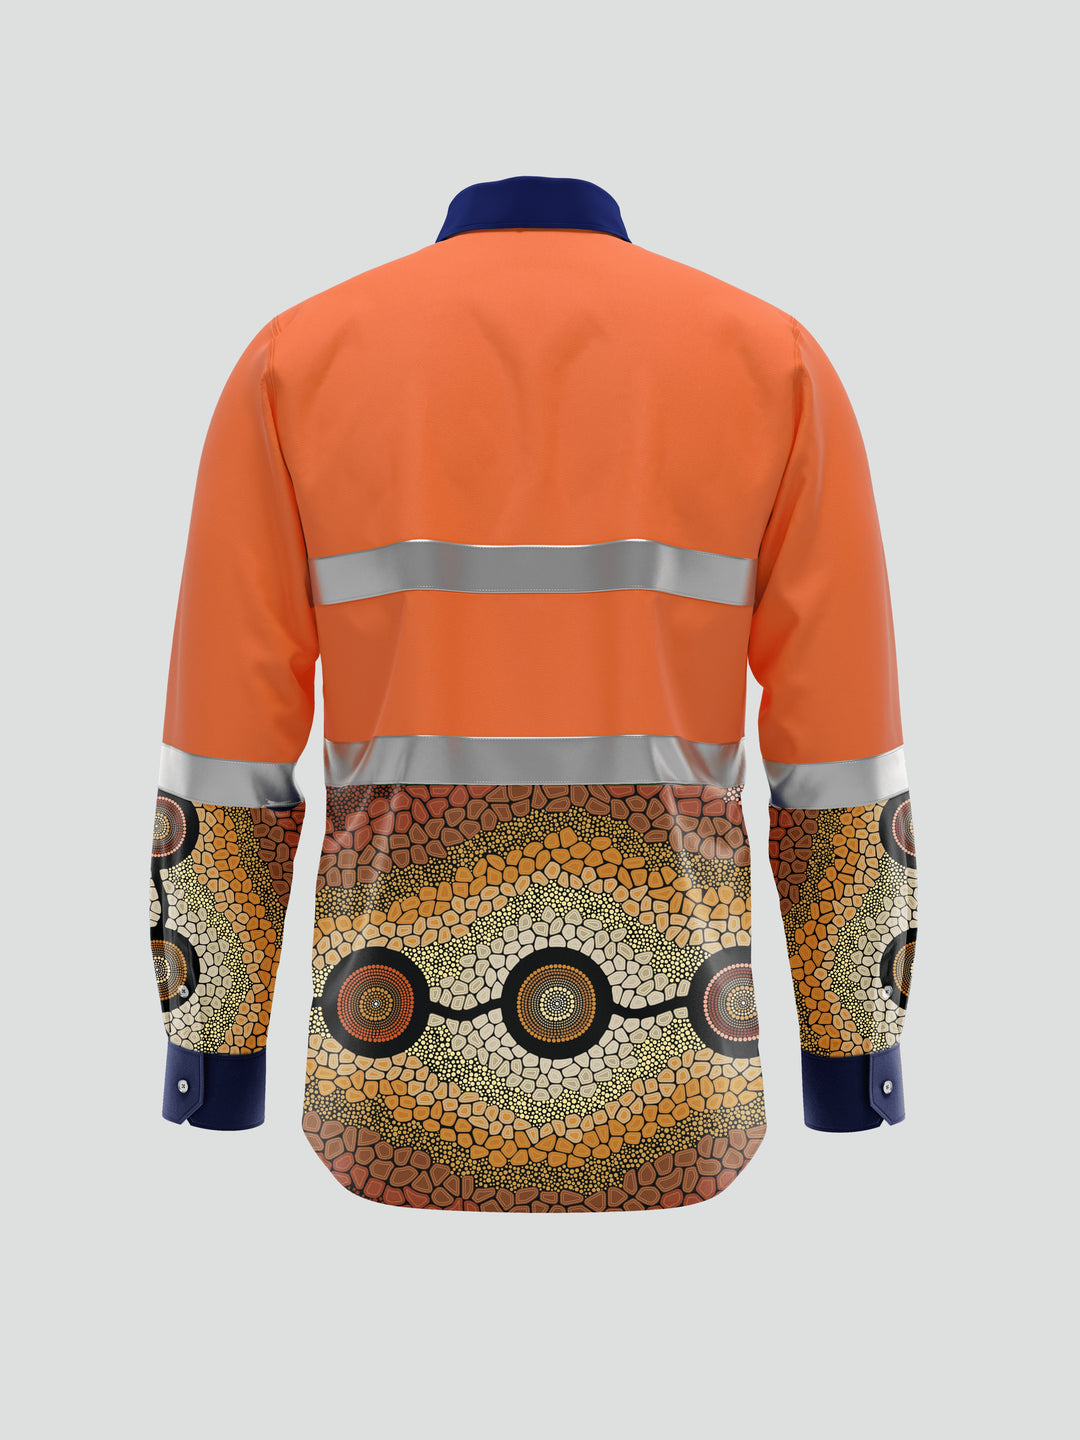 She Sings To Me From the Dreaming - Corporate Hi-Vis Unisex Workwear Shirt